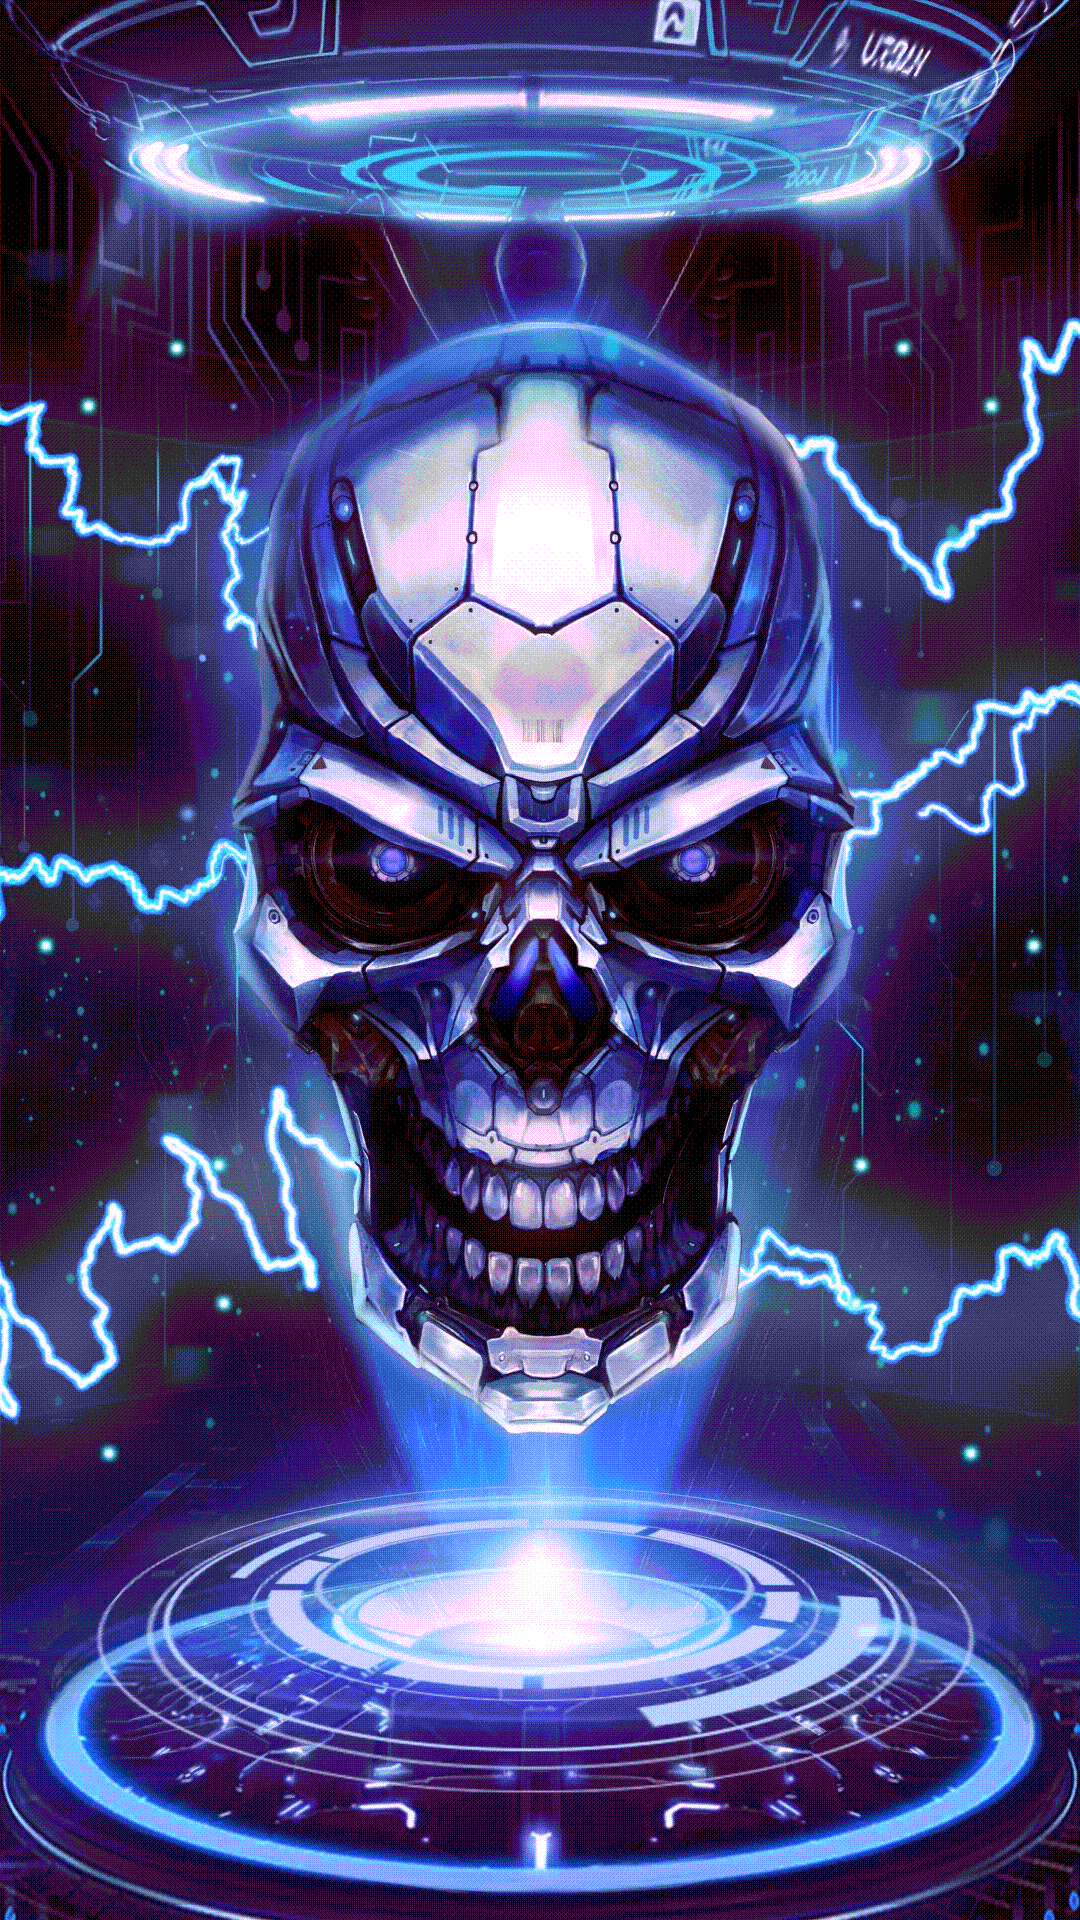 New Cool Skull Live Wallpaper Android From